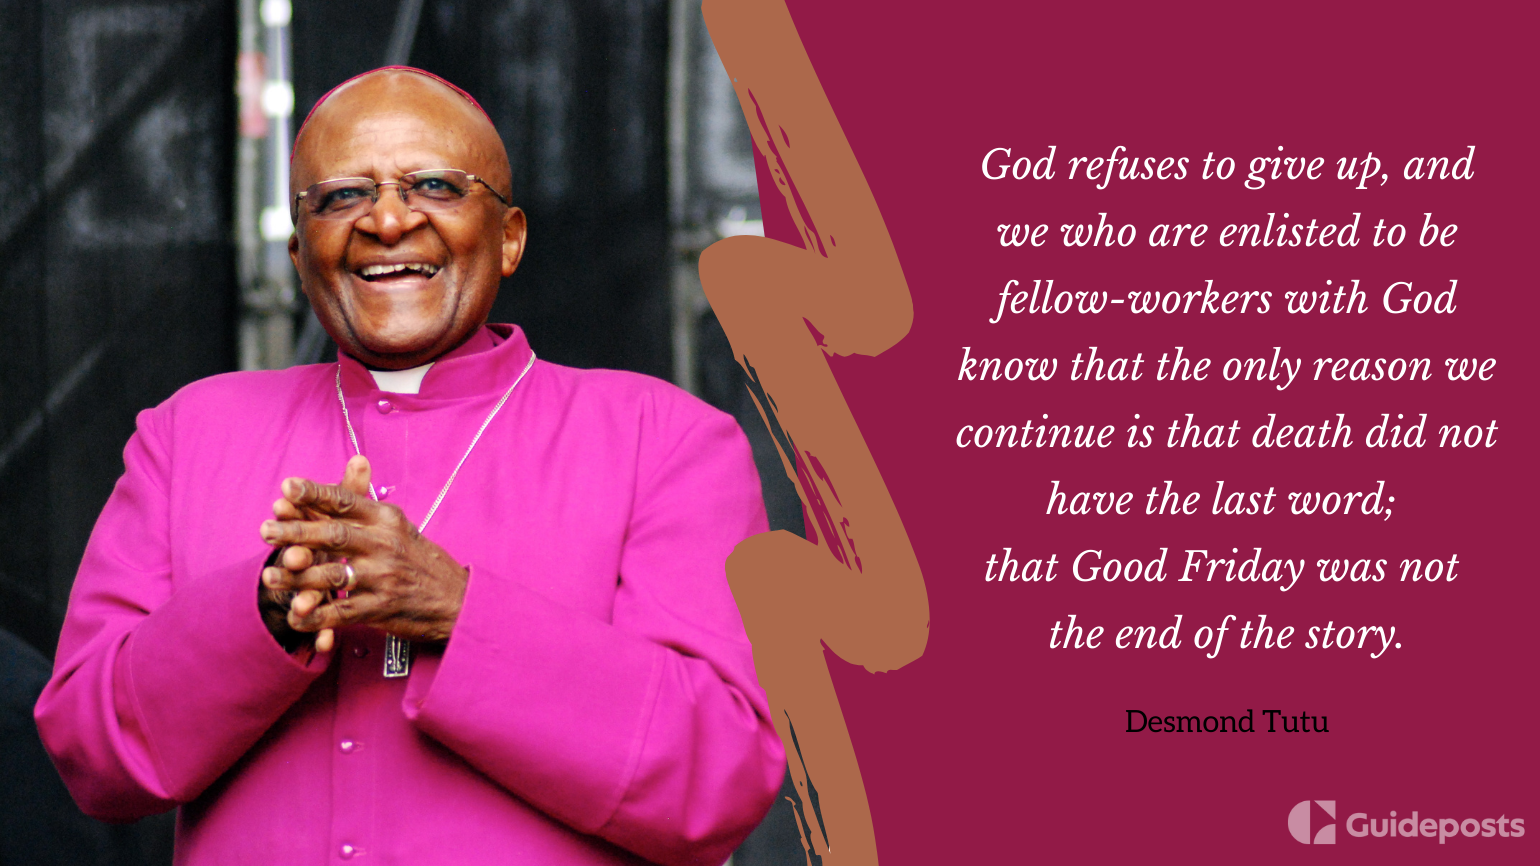 God refuses to give up, and we who are enlisted to be fellow-workers with God know that the only reason we continue is that death did not have the last word; that Good Friday was not the end of the story.  —Desmond Tutu